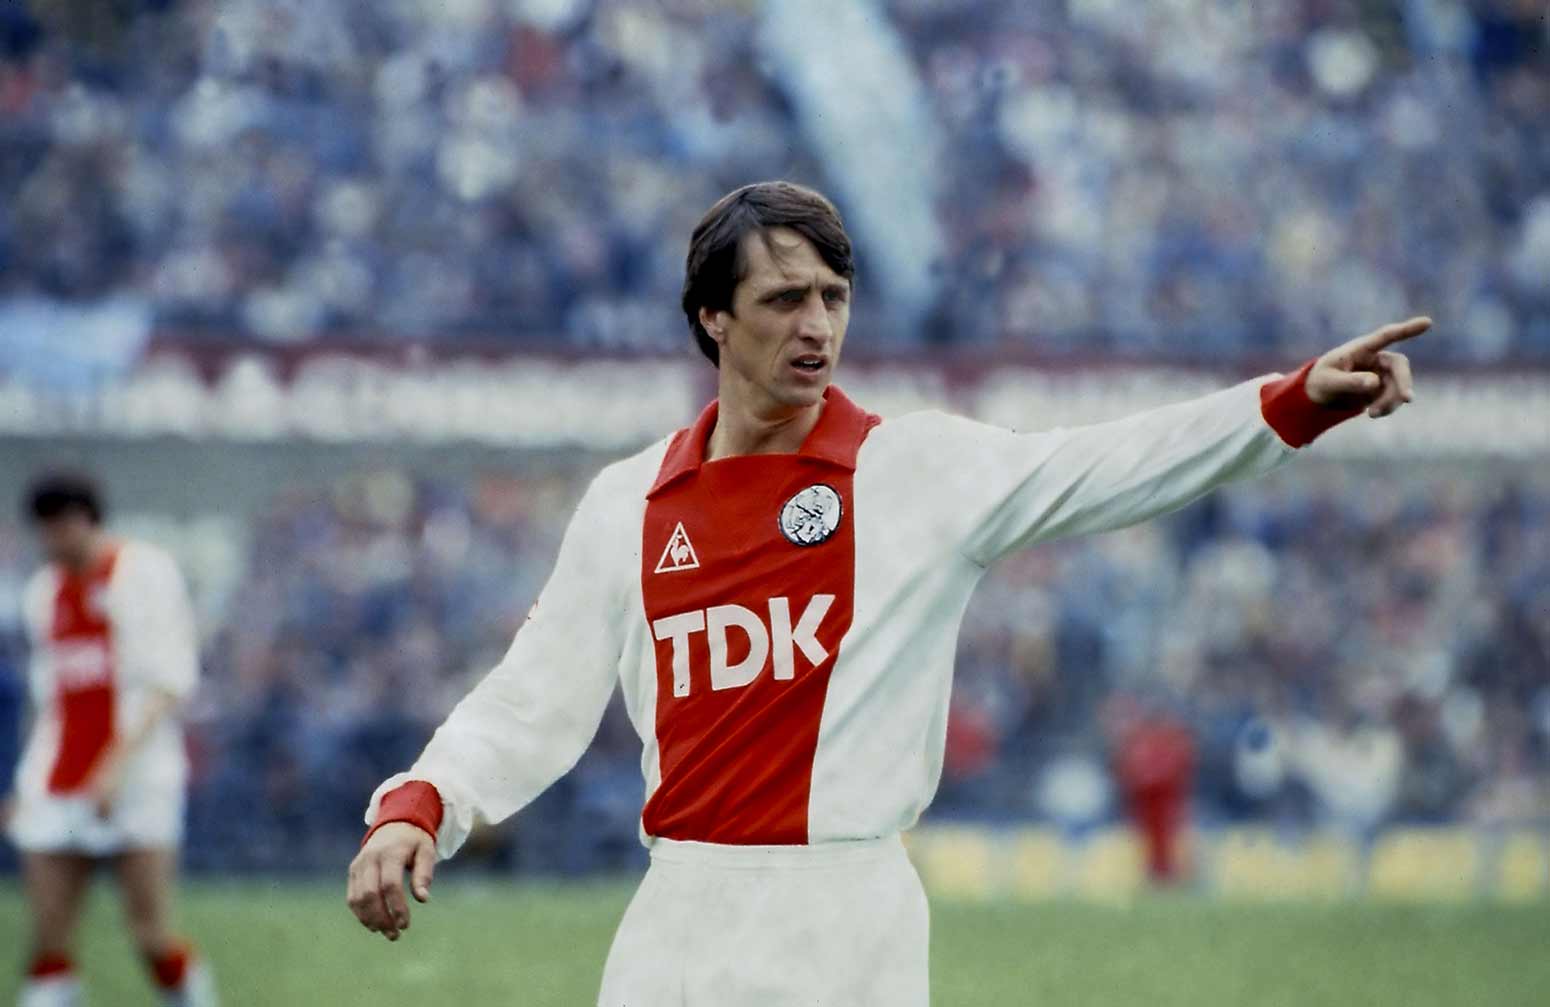 Best 11 Ajax Players of All-Time | SoccerGator